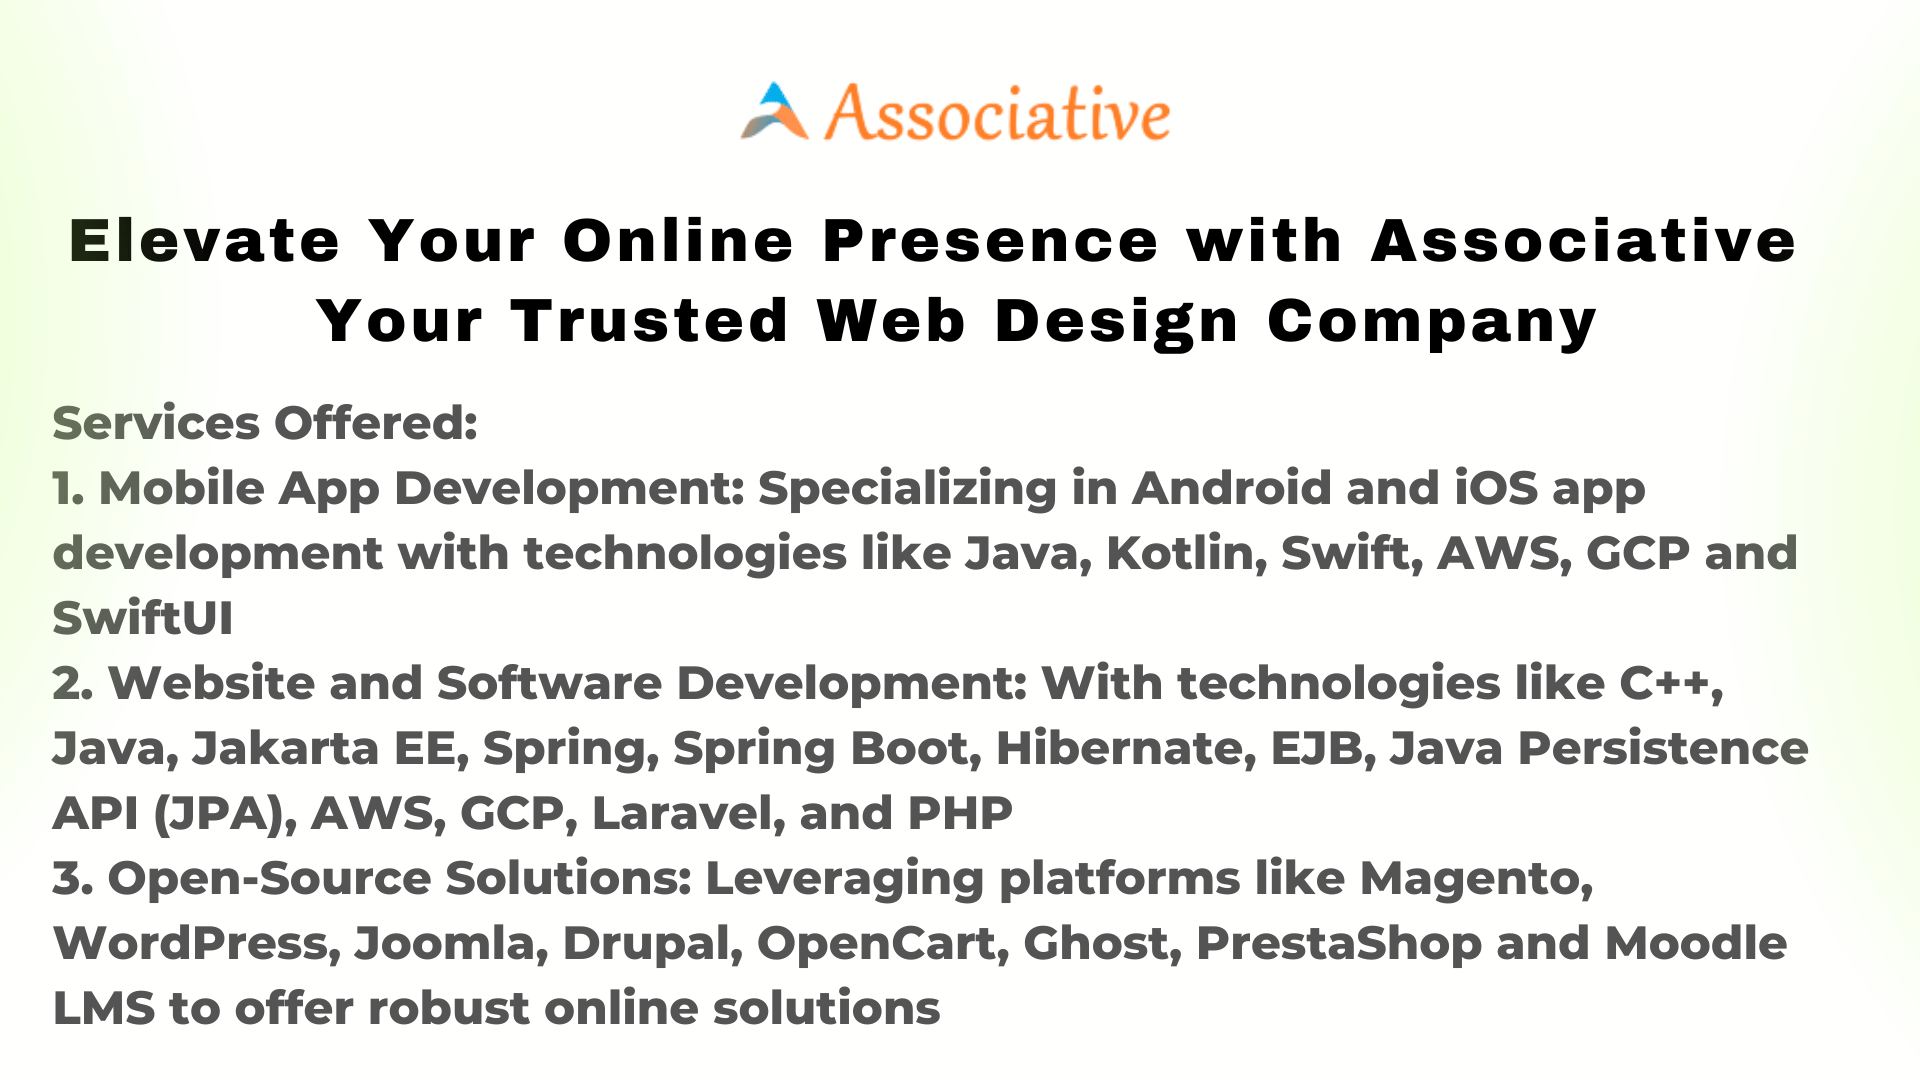 Elevate Your Online Presence with Associative Your Trusted Web Design Company